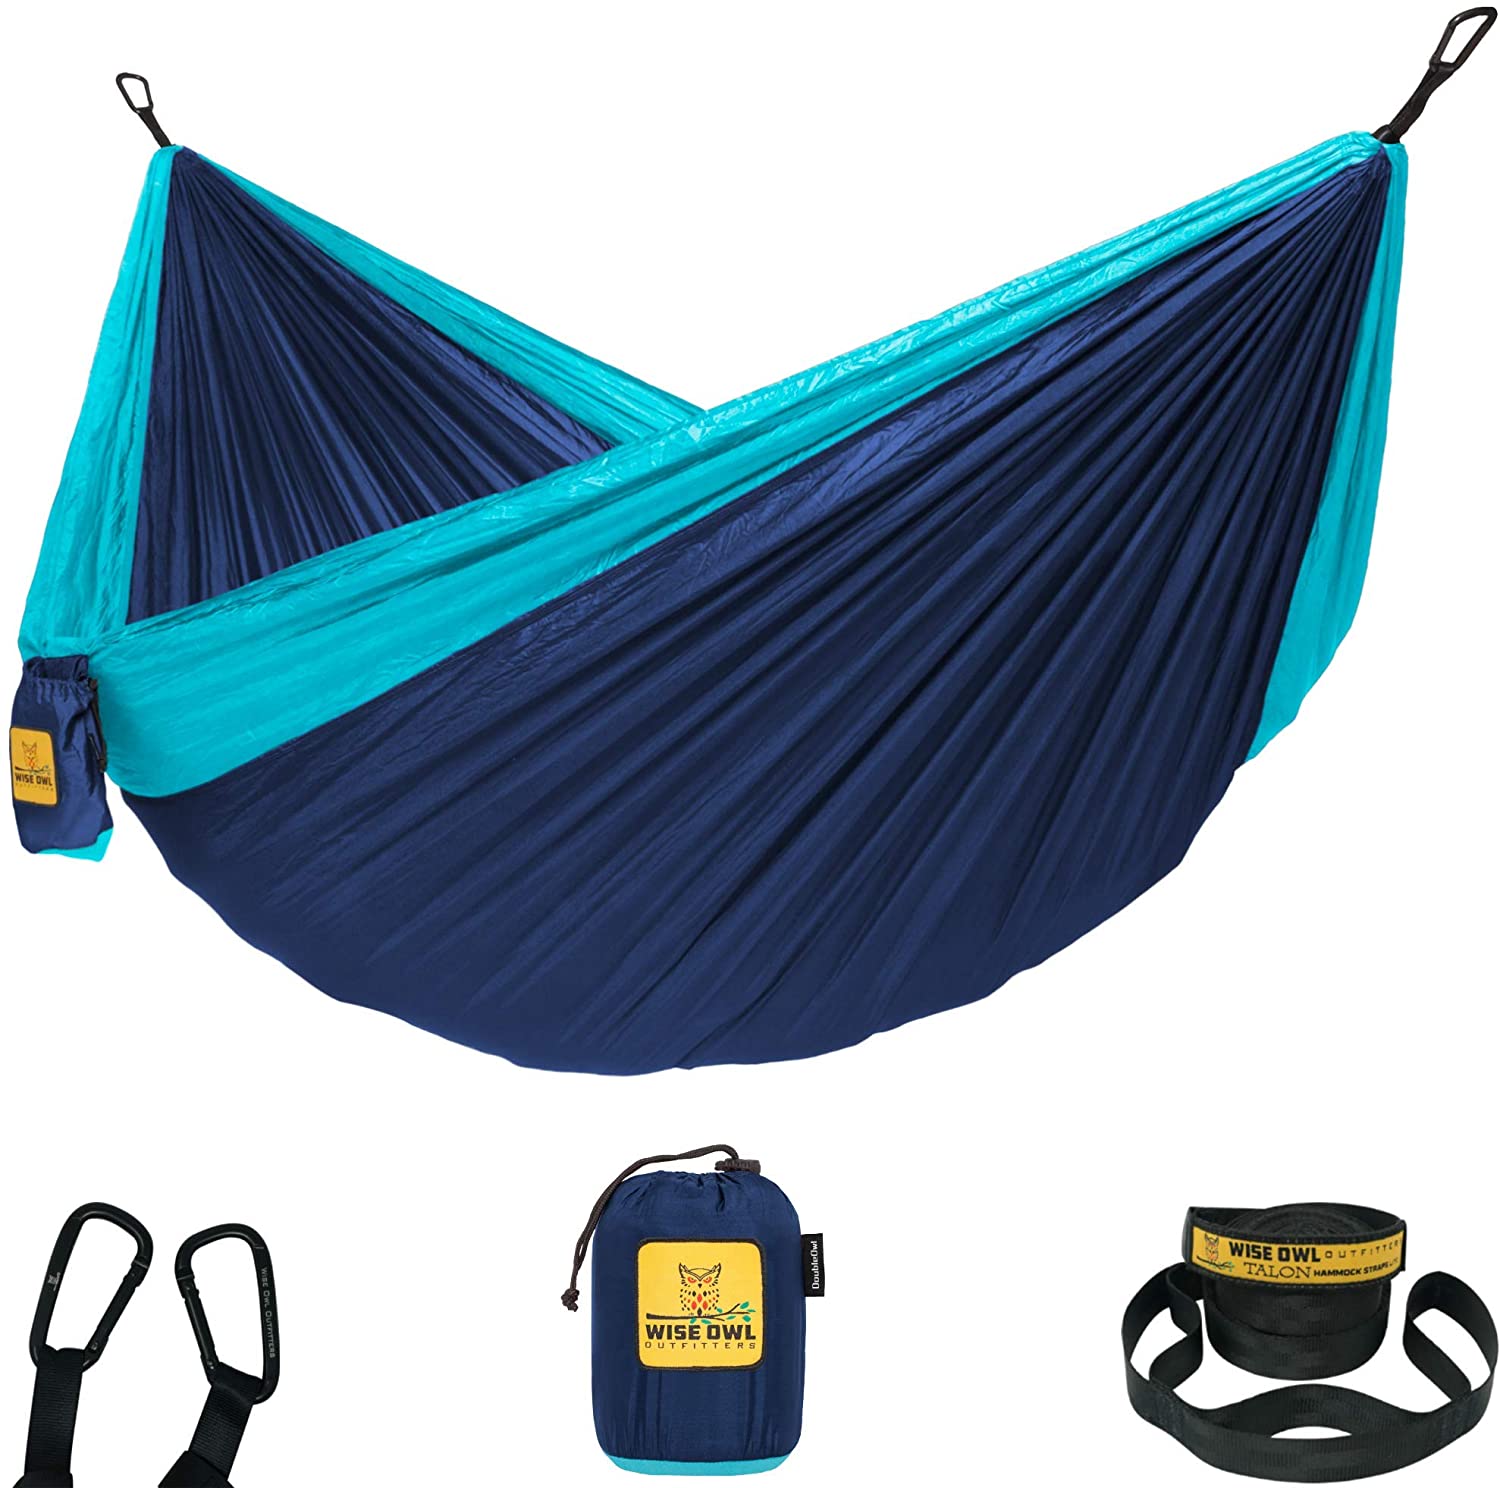 Wise Owl Outfitters 210T Parachute Nylon Hammock